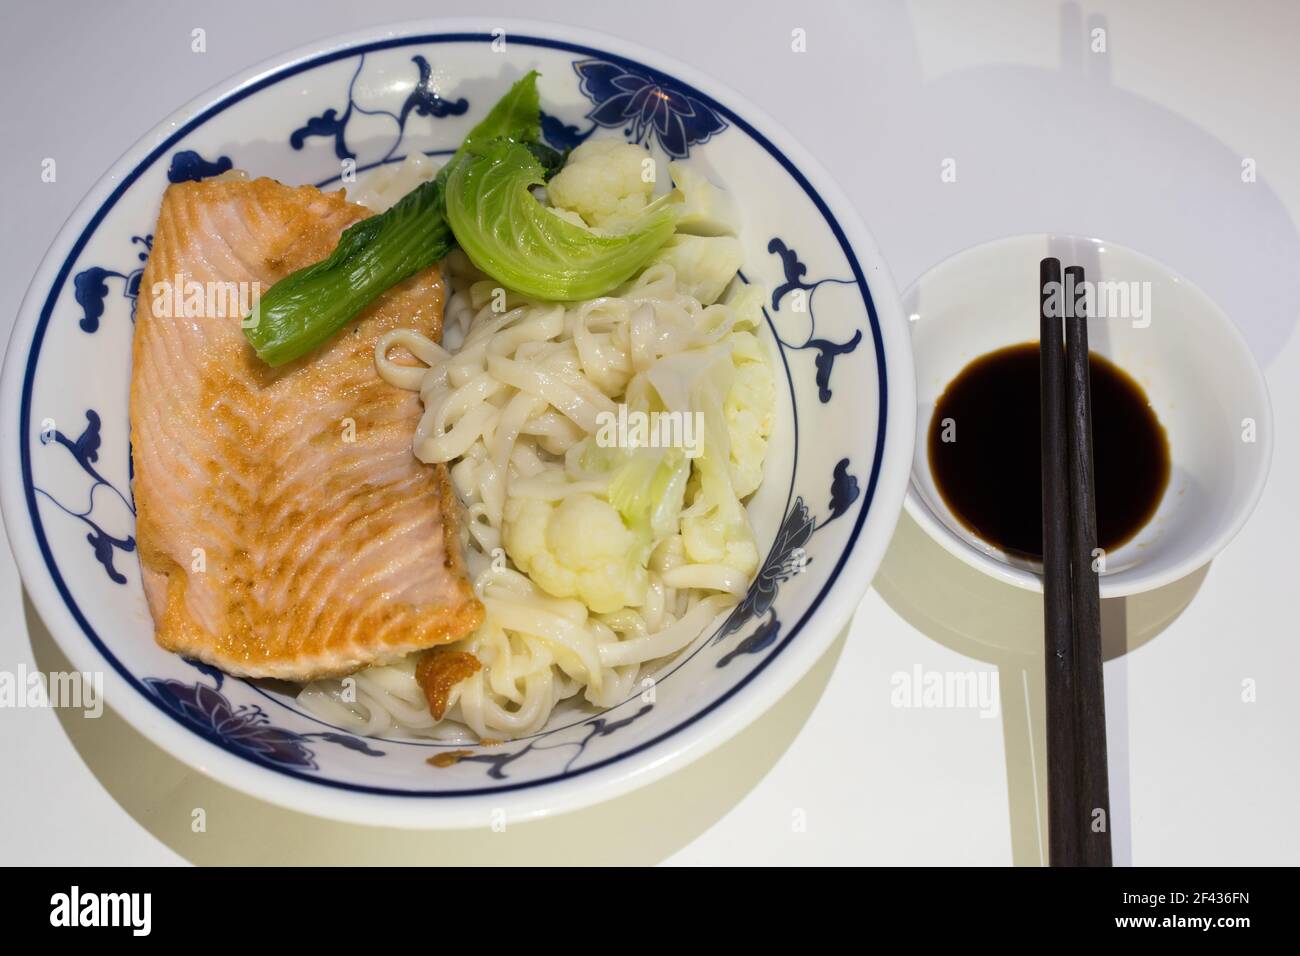 Salmon salad with avocado, green leaves and toasted breads Stock Photo